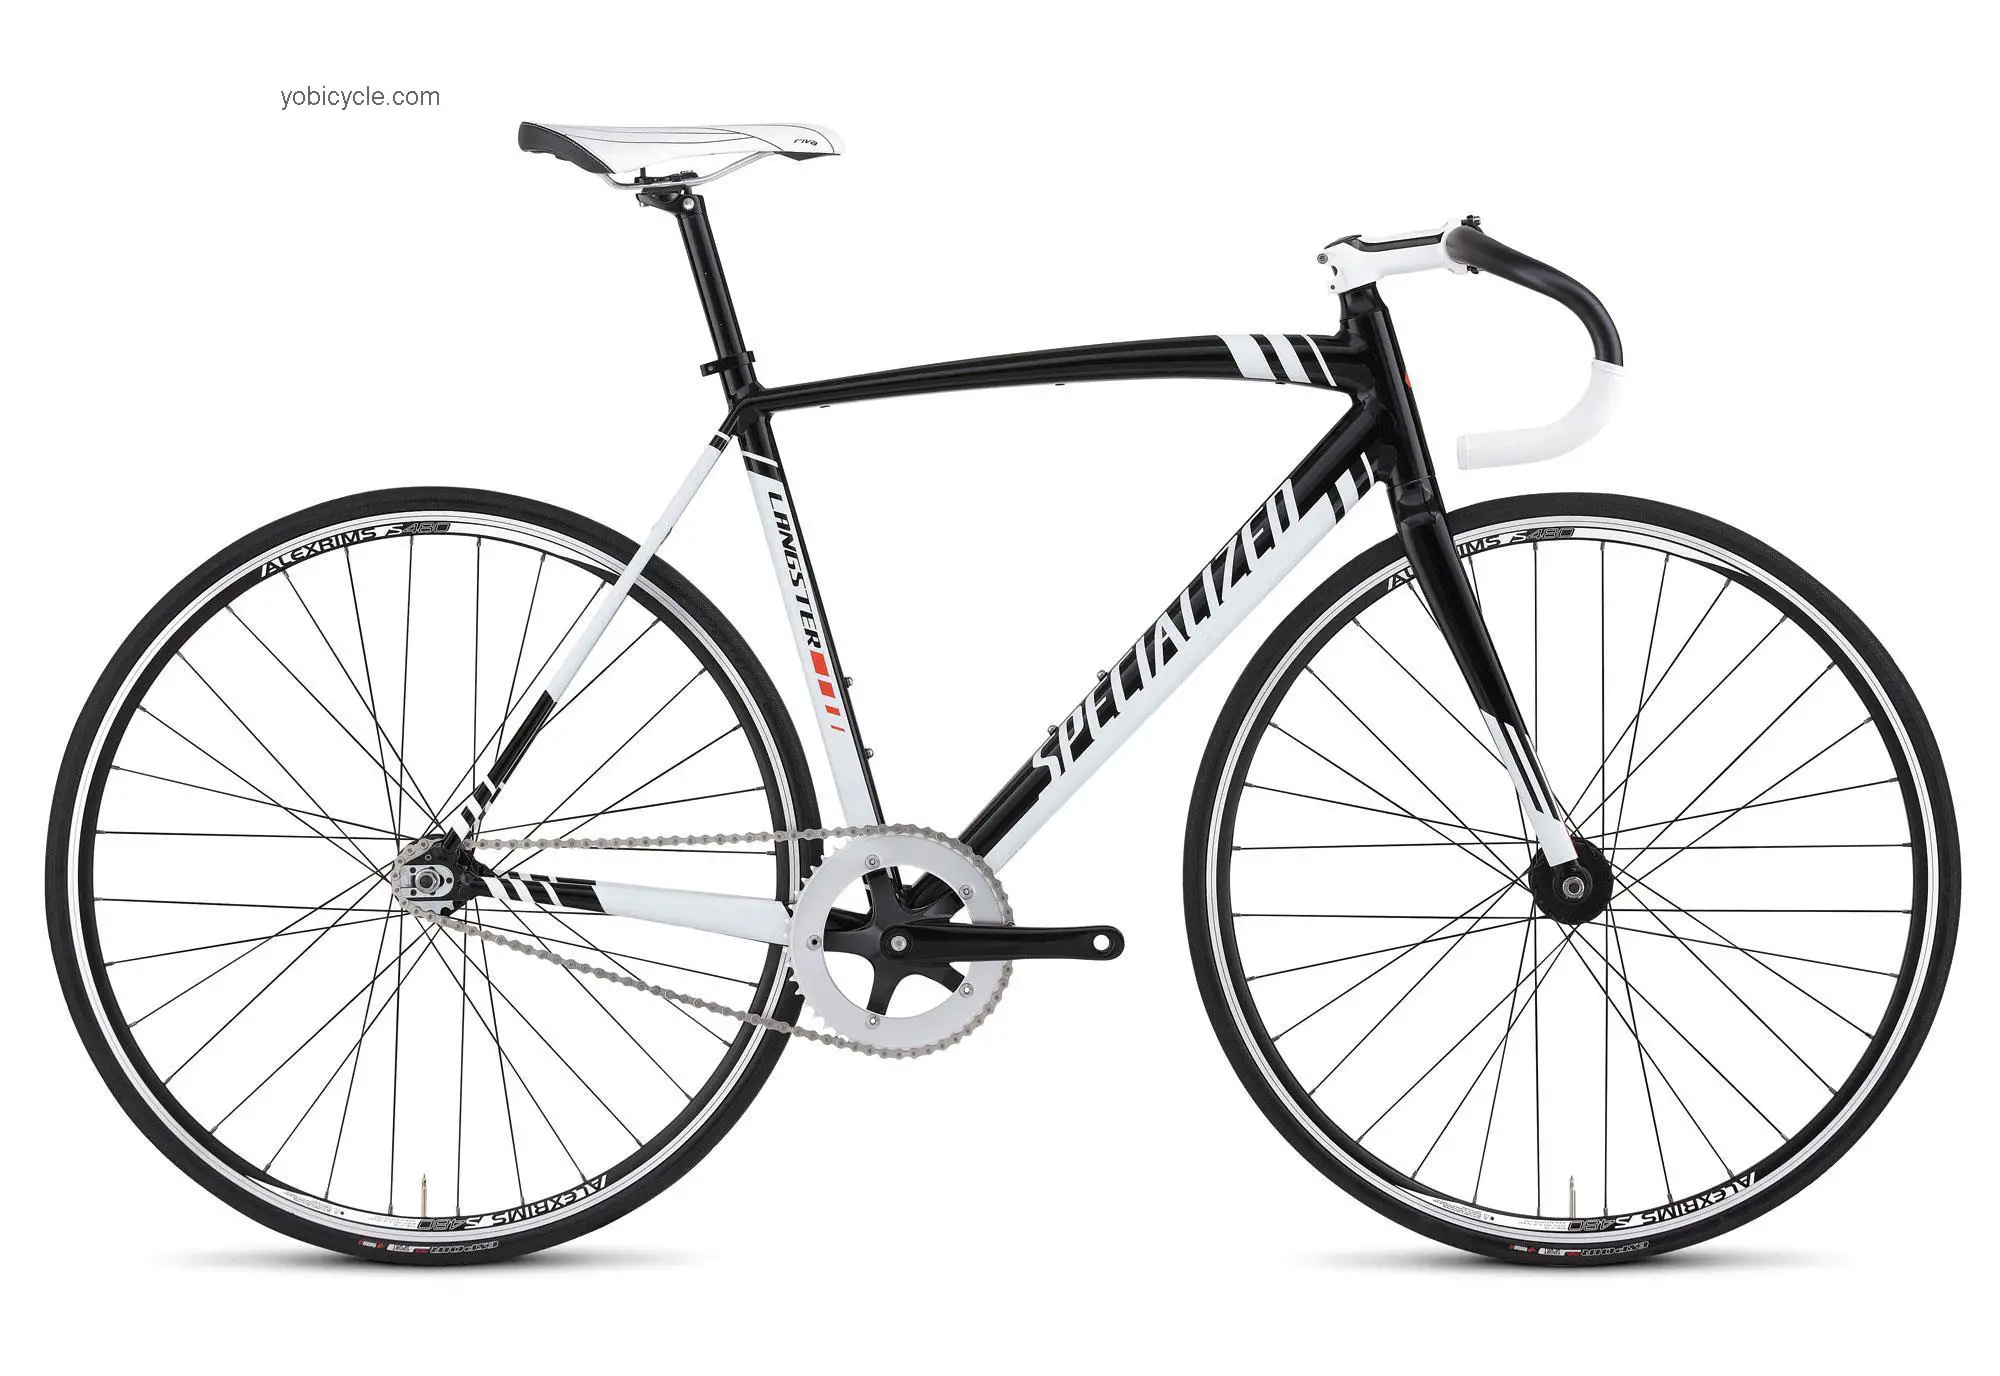 Specialized Langster 2012 comparison online with competitors